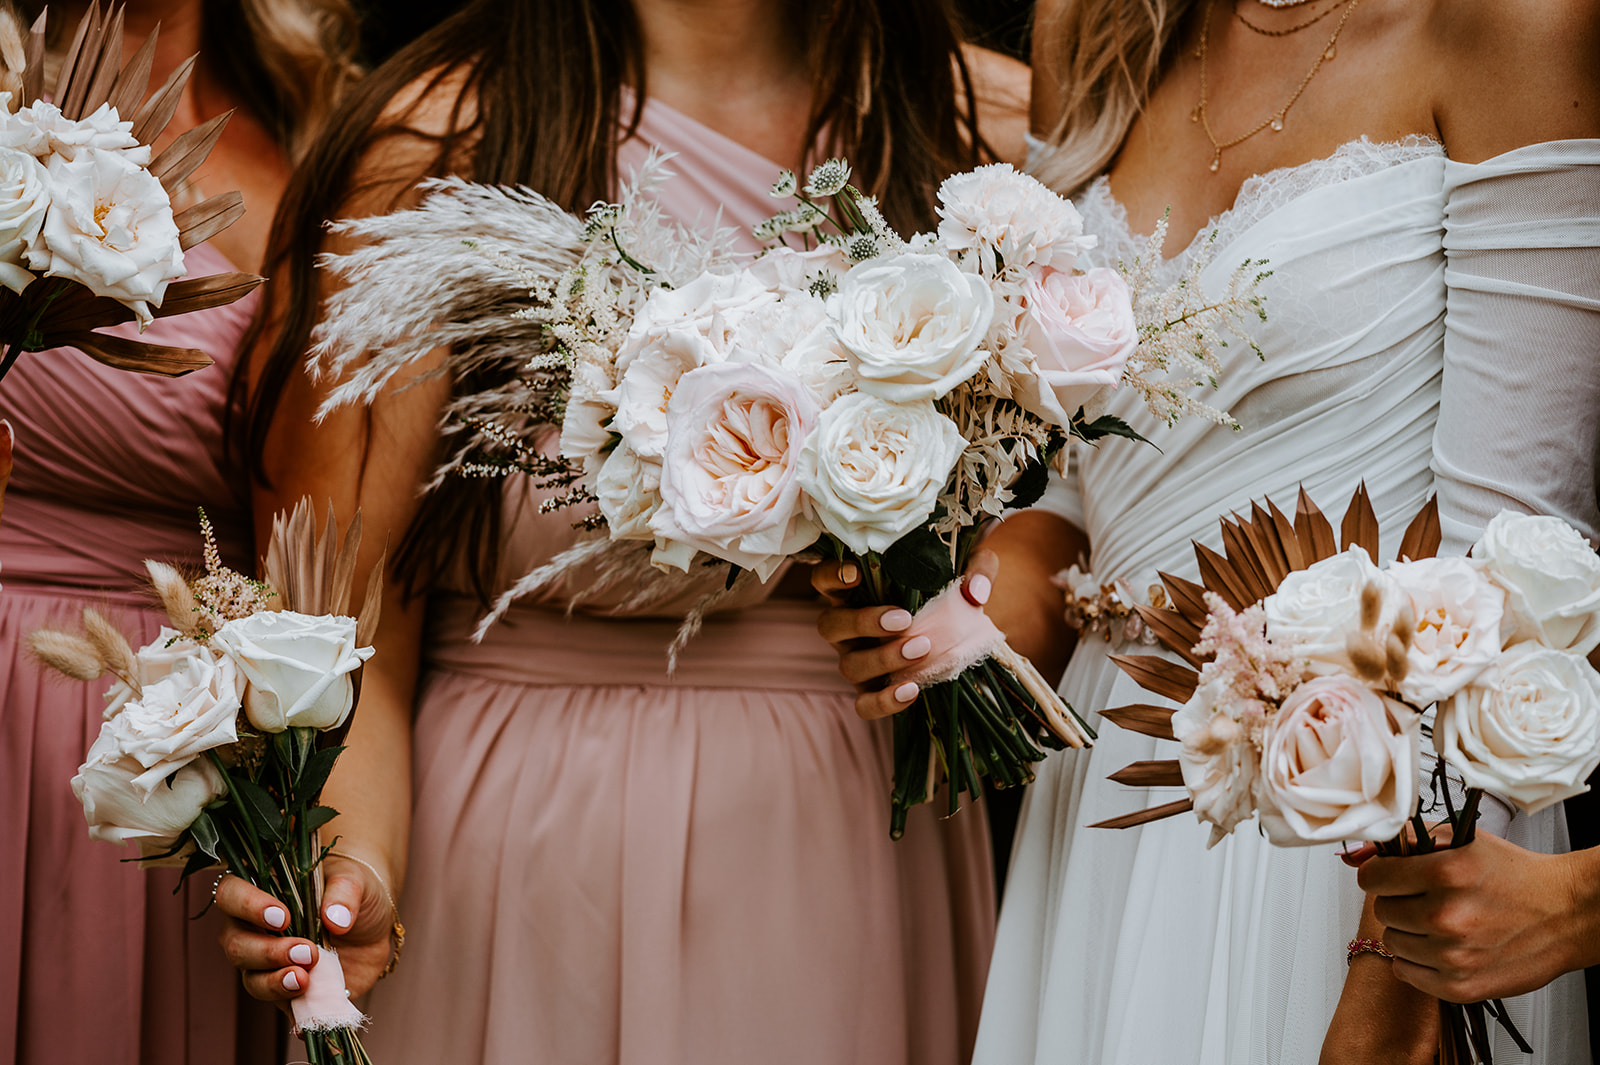 Blush wedding colors and bridal and bridesmaids bouquets